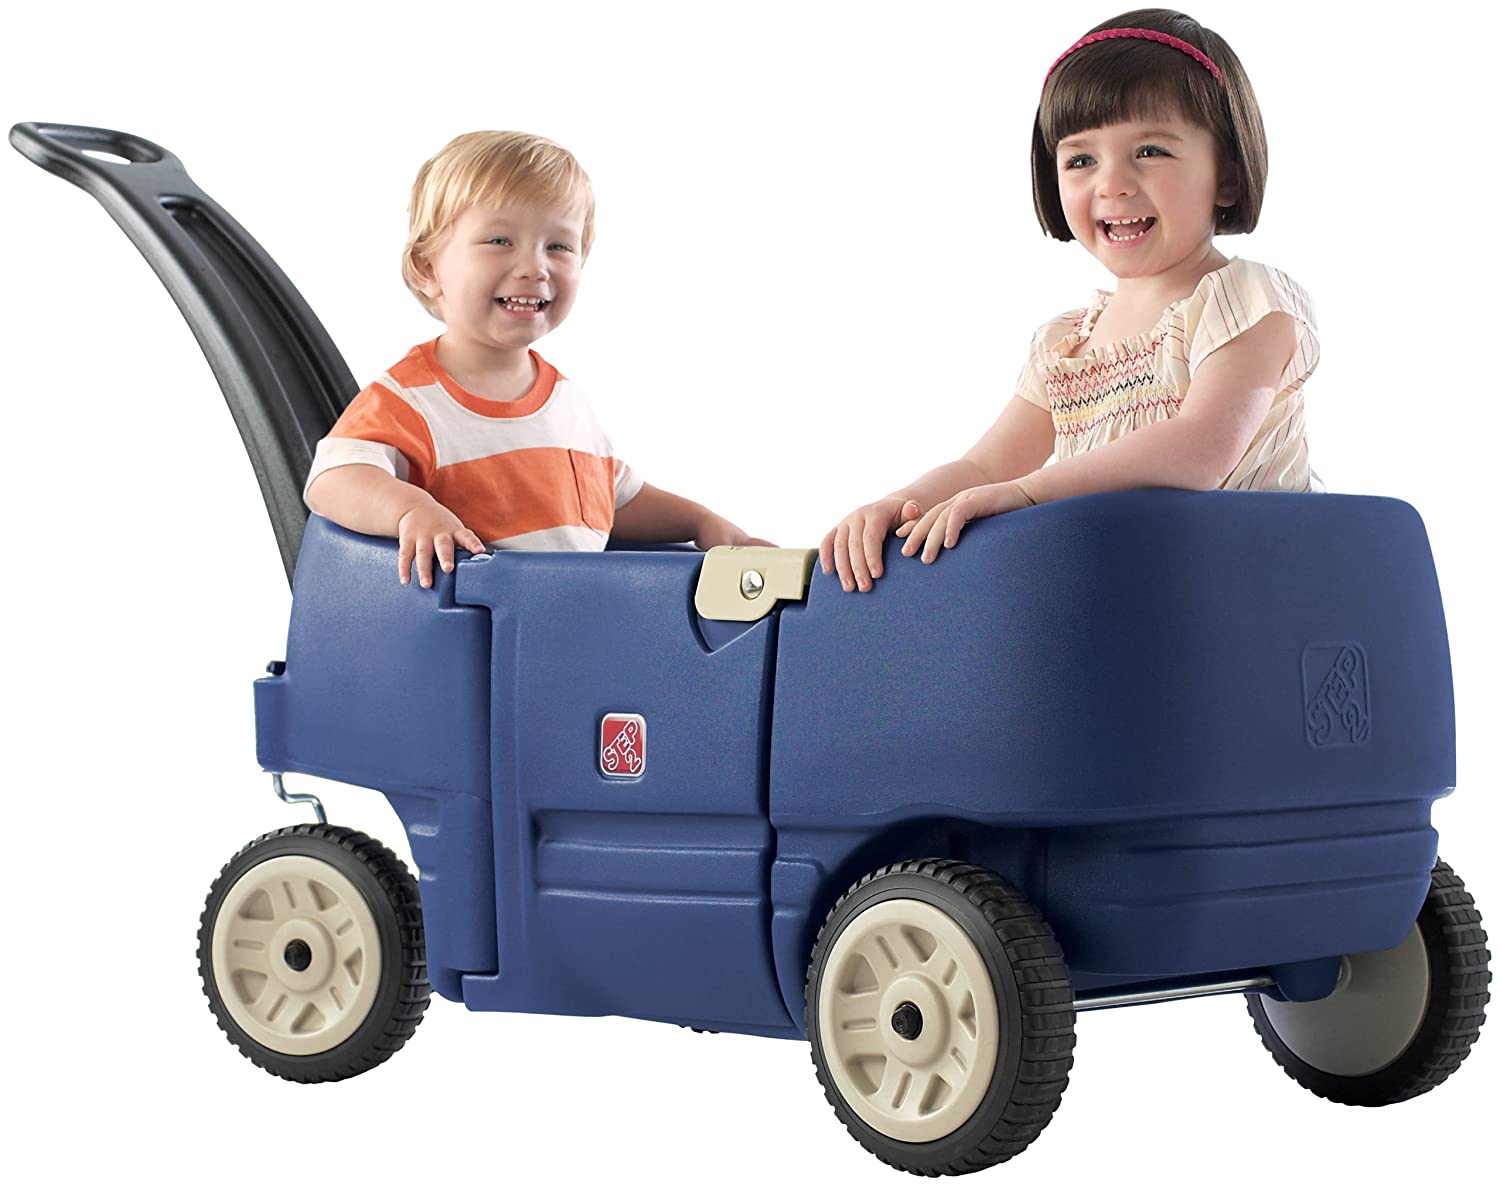 Top 10 Best Wagons for Kids Reviews in 2023 6